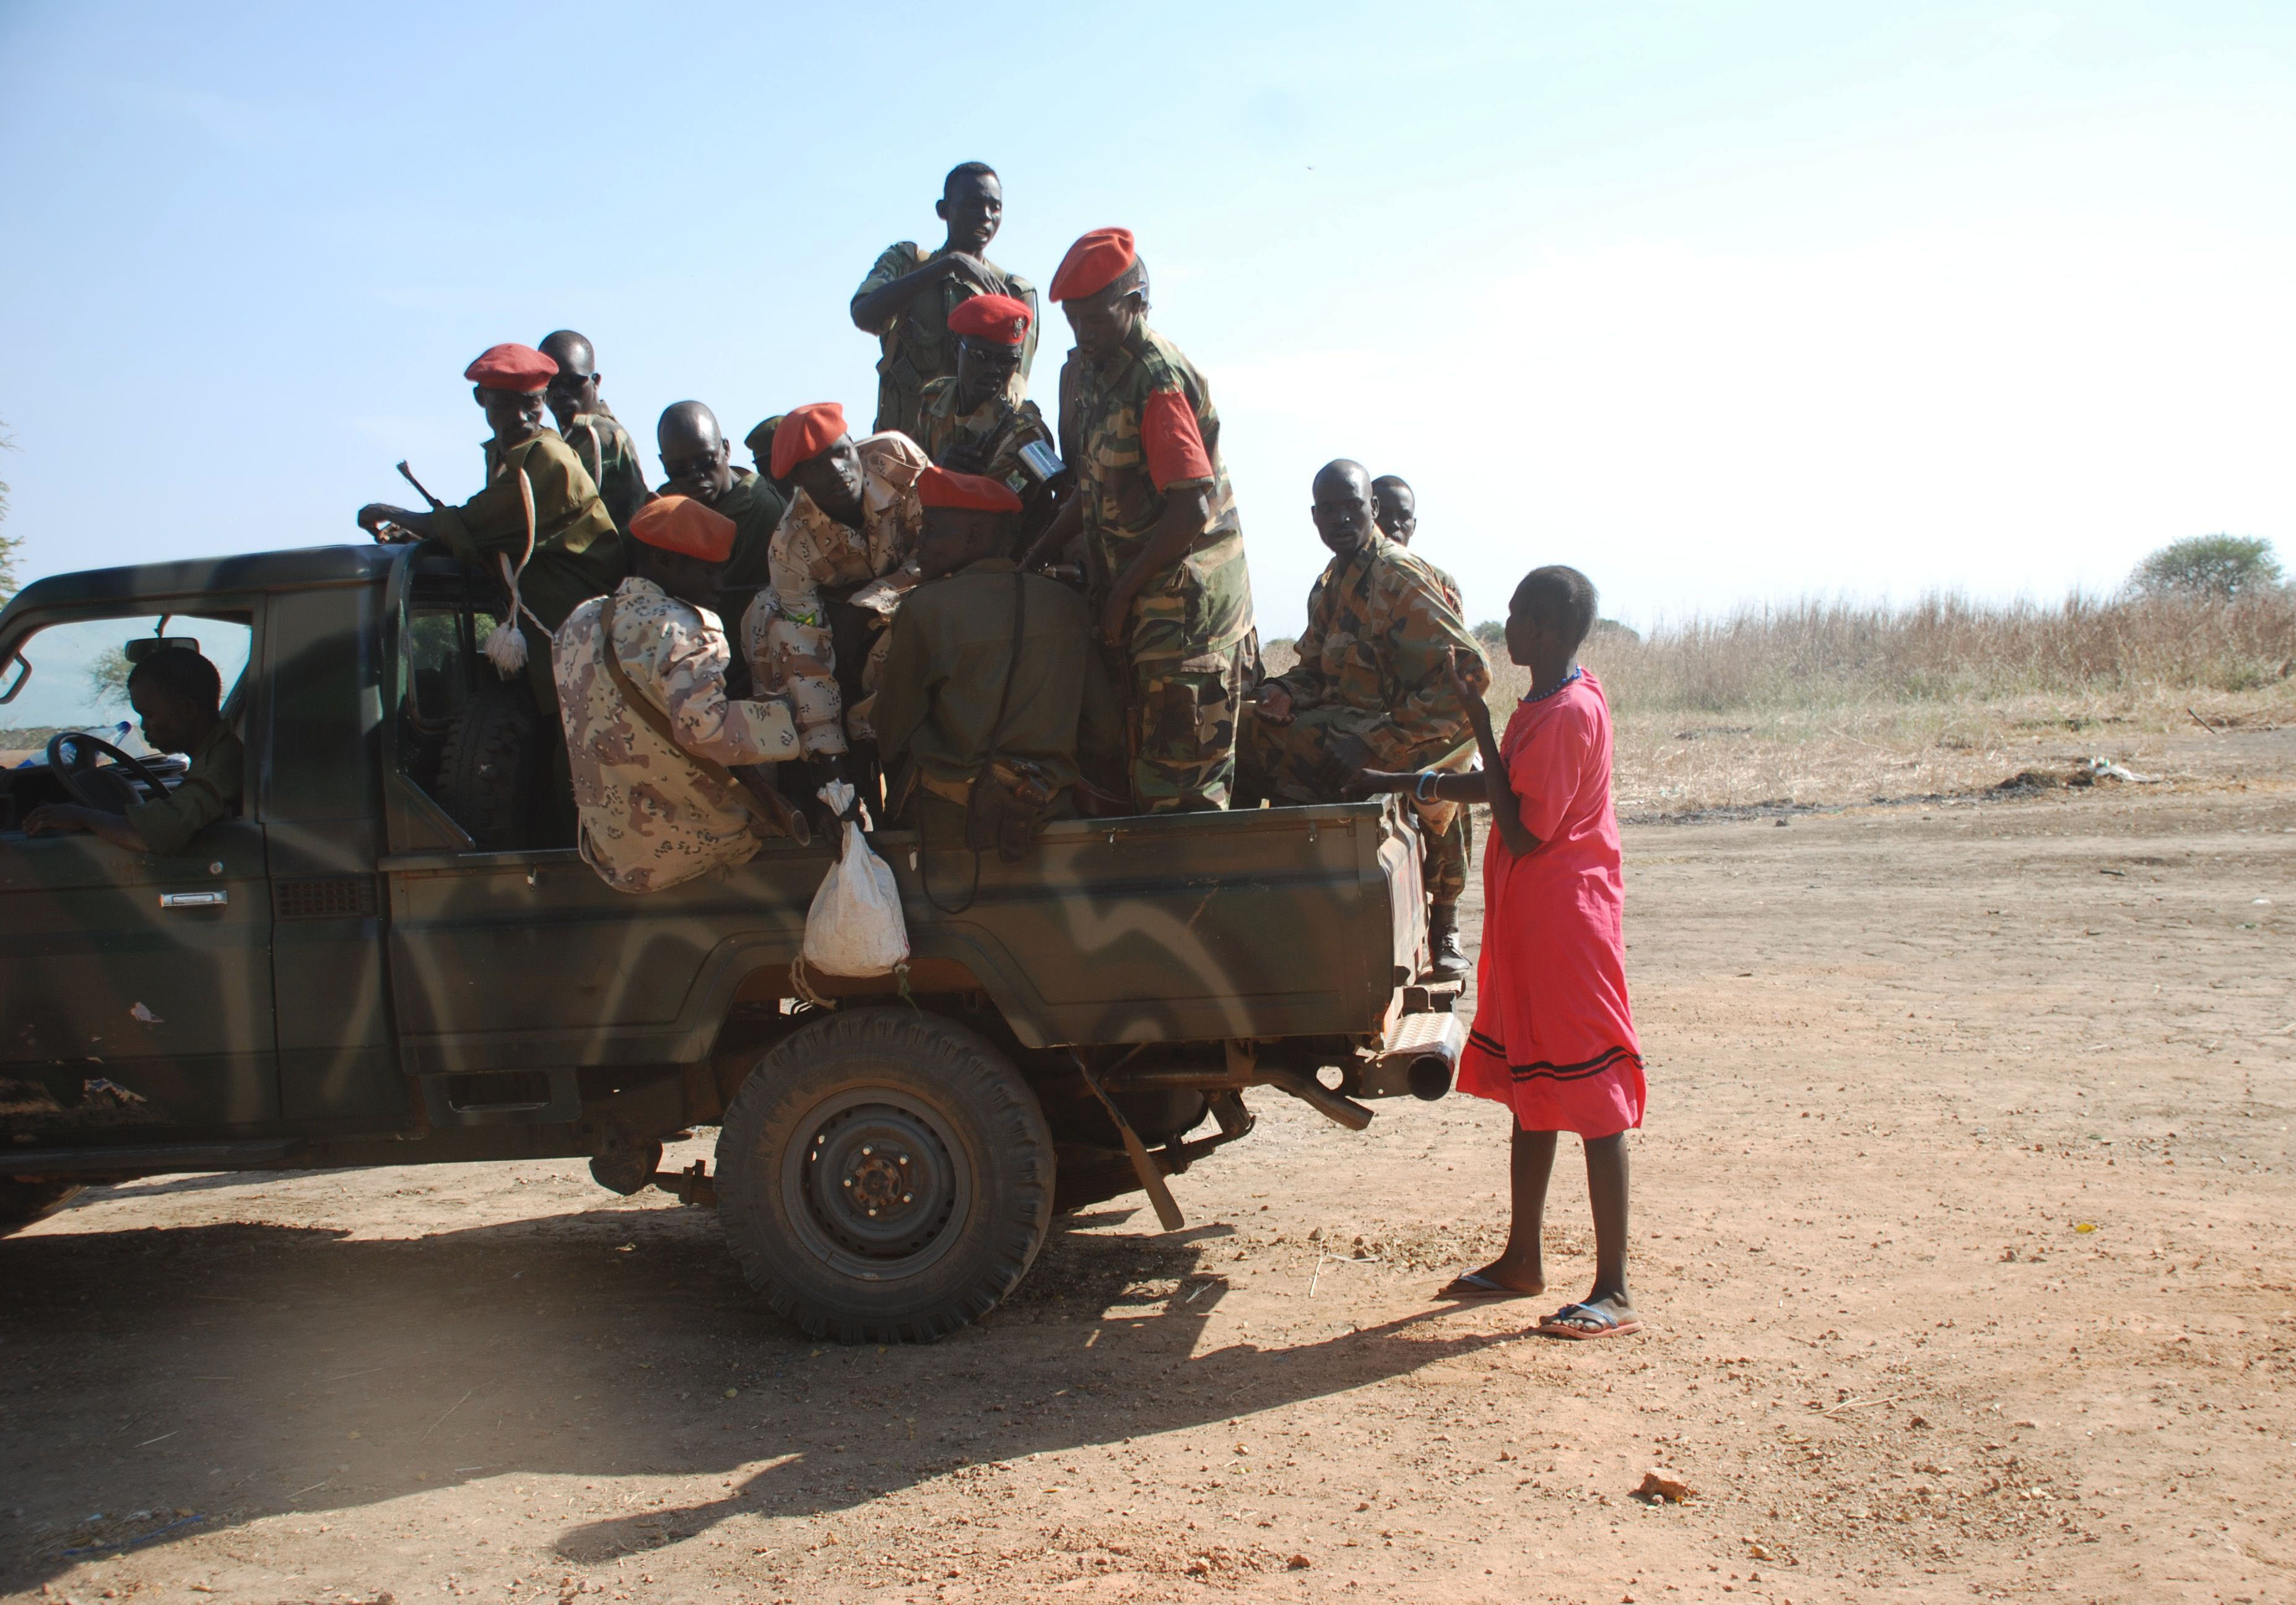 Progress on Sudan-South Sudan Border and Citizenship Issues in the Offing?